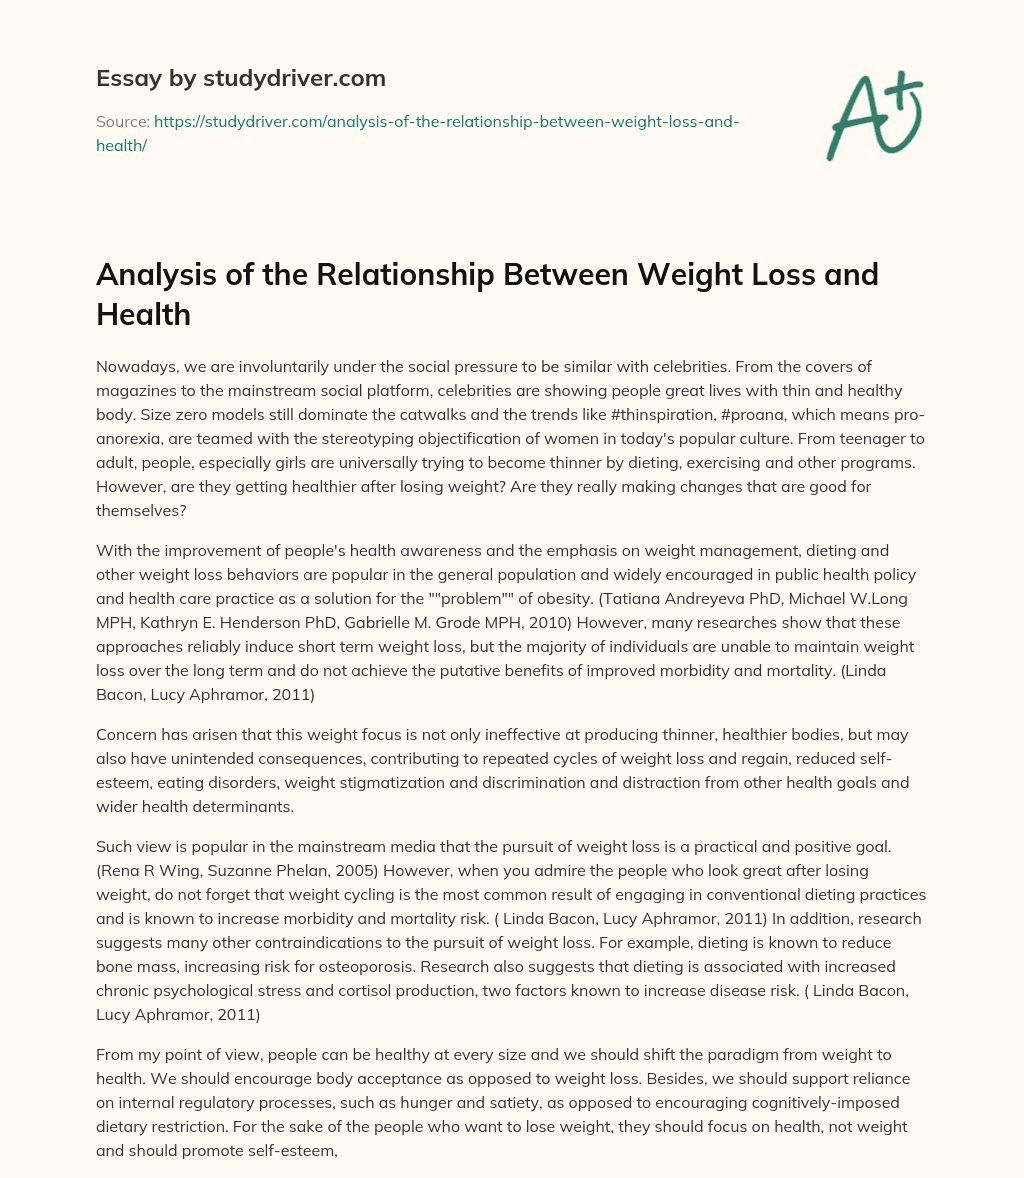 Analysis of the Relationship between Weight Loss and Health essay